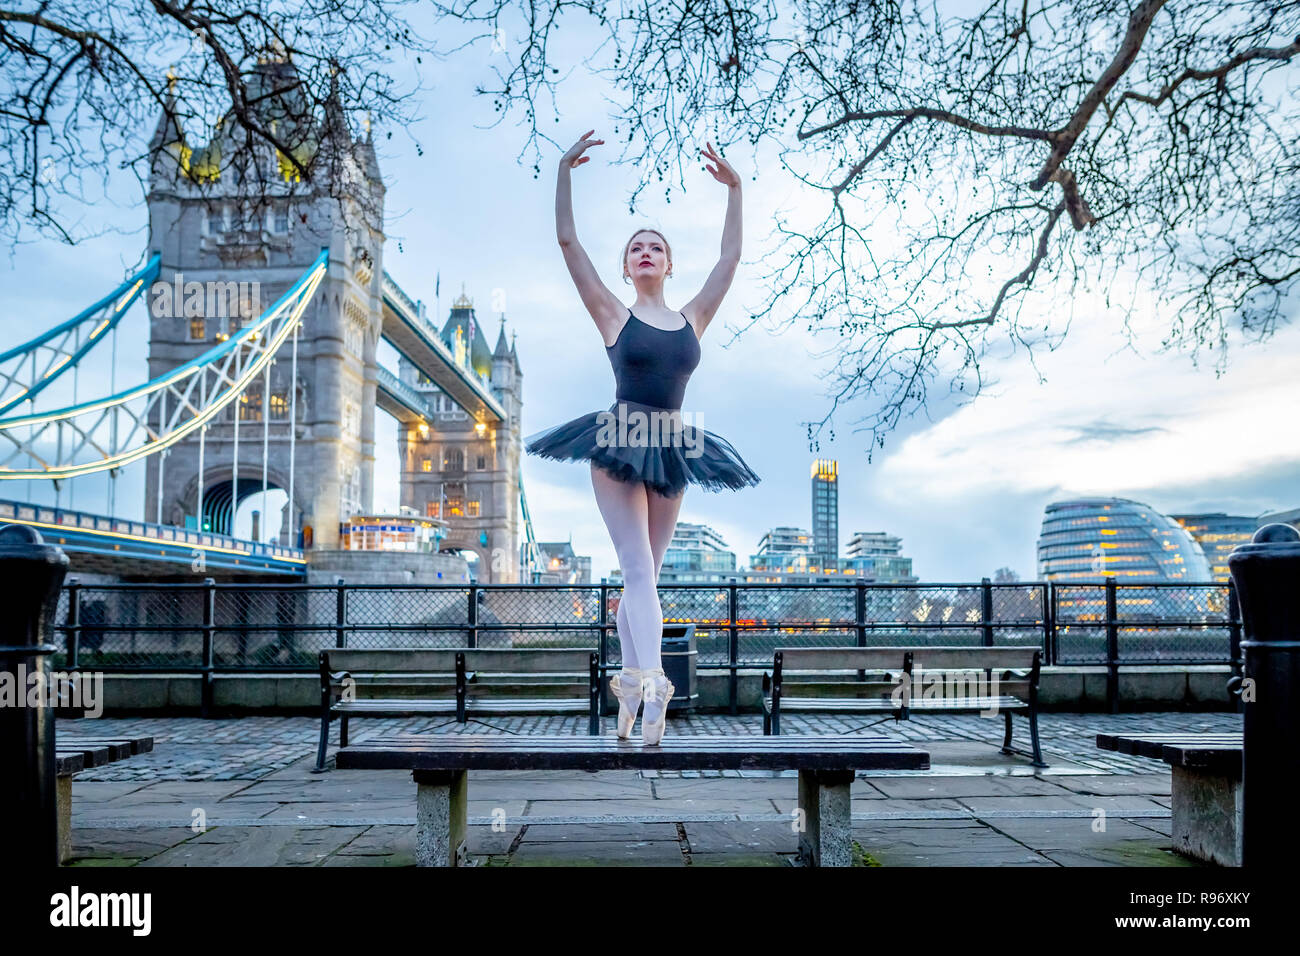 London, UK. 20th December, 2018. Dancers from Semaphore Ballet Company perform at Tower Hill in the last evening light before the winter solstice. Tonight will be the longest night of the year with the sun not rising until 08:03 GMT on Friday morning. Dancer pictured: Beth Wareing. Credit: Guy Corbishley/Alamy Live News Stock Photo